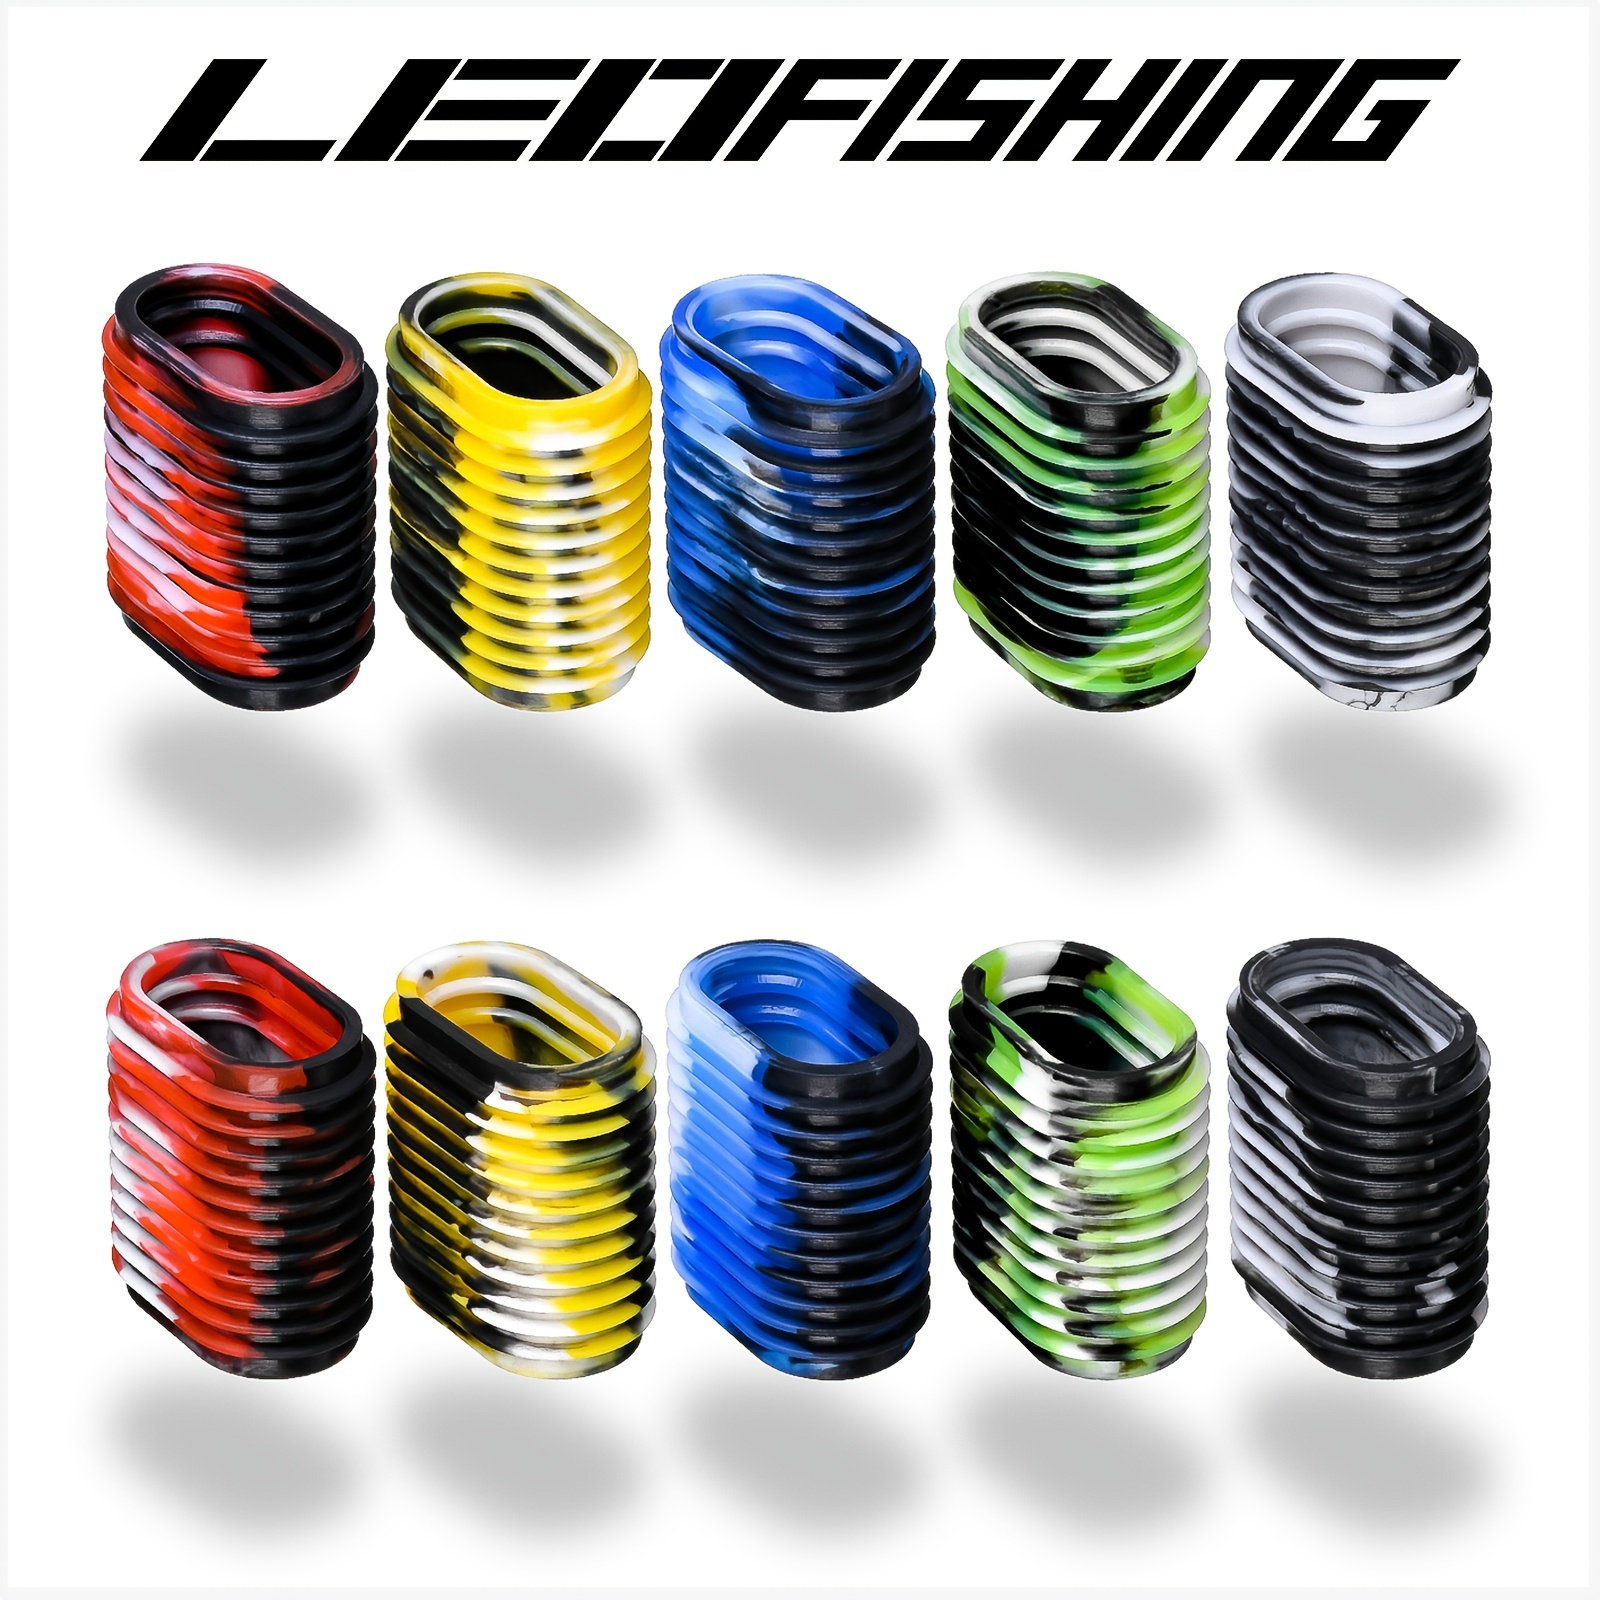 2pcs 5 colors Leofishing Non-Slip Rubber Reel Handle Grip Cover for Casting  & Spinning Reels - Enhance Your Fishing Experience